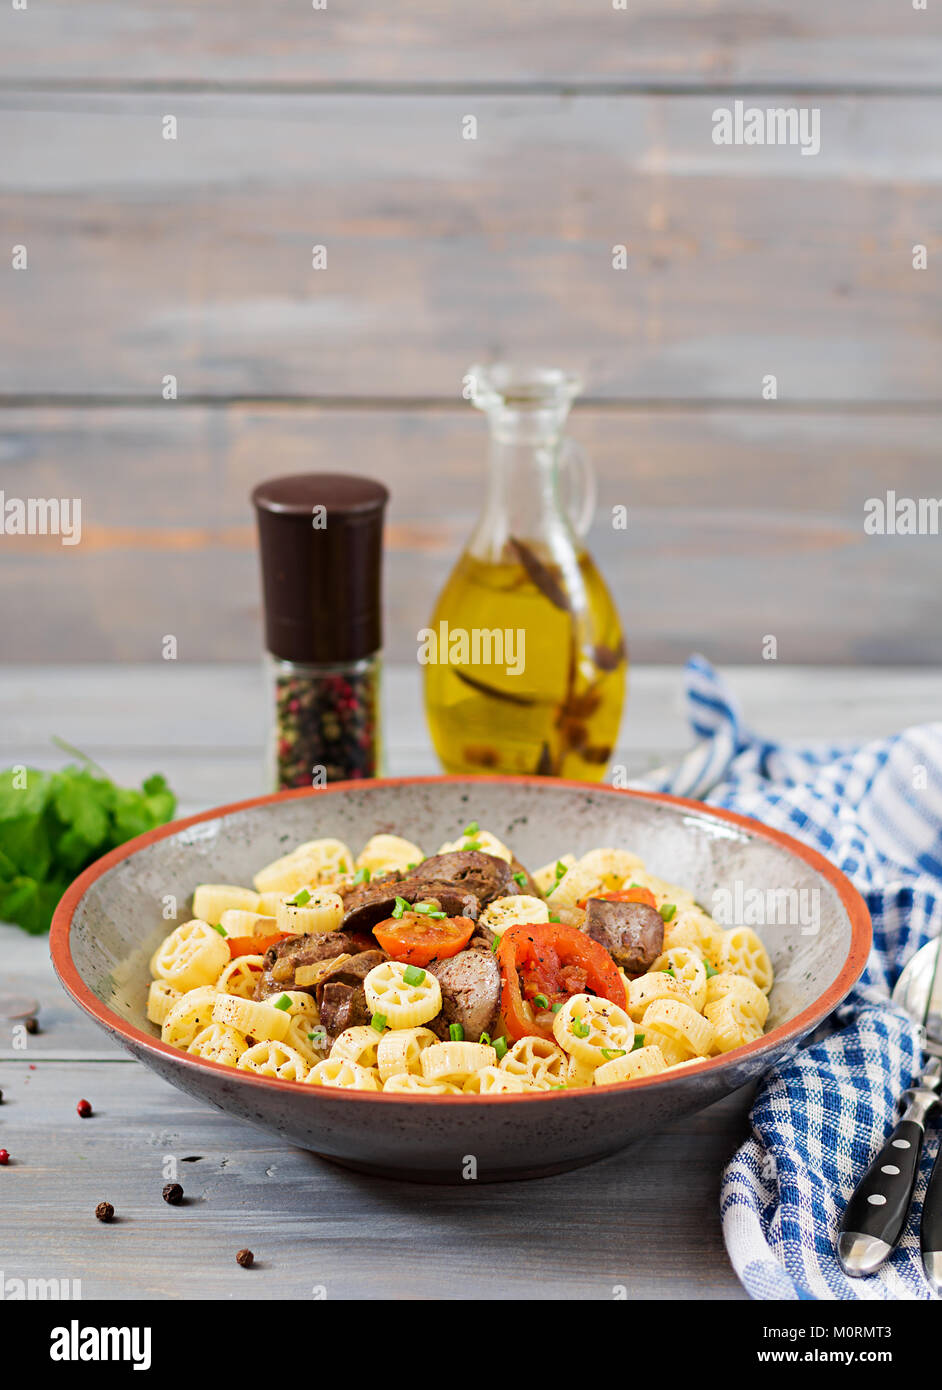 Fried chicken liver with tomato and garnish of pasta Stock Photo